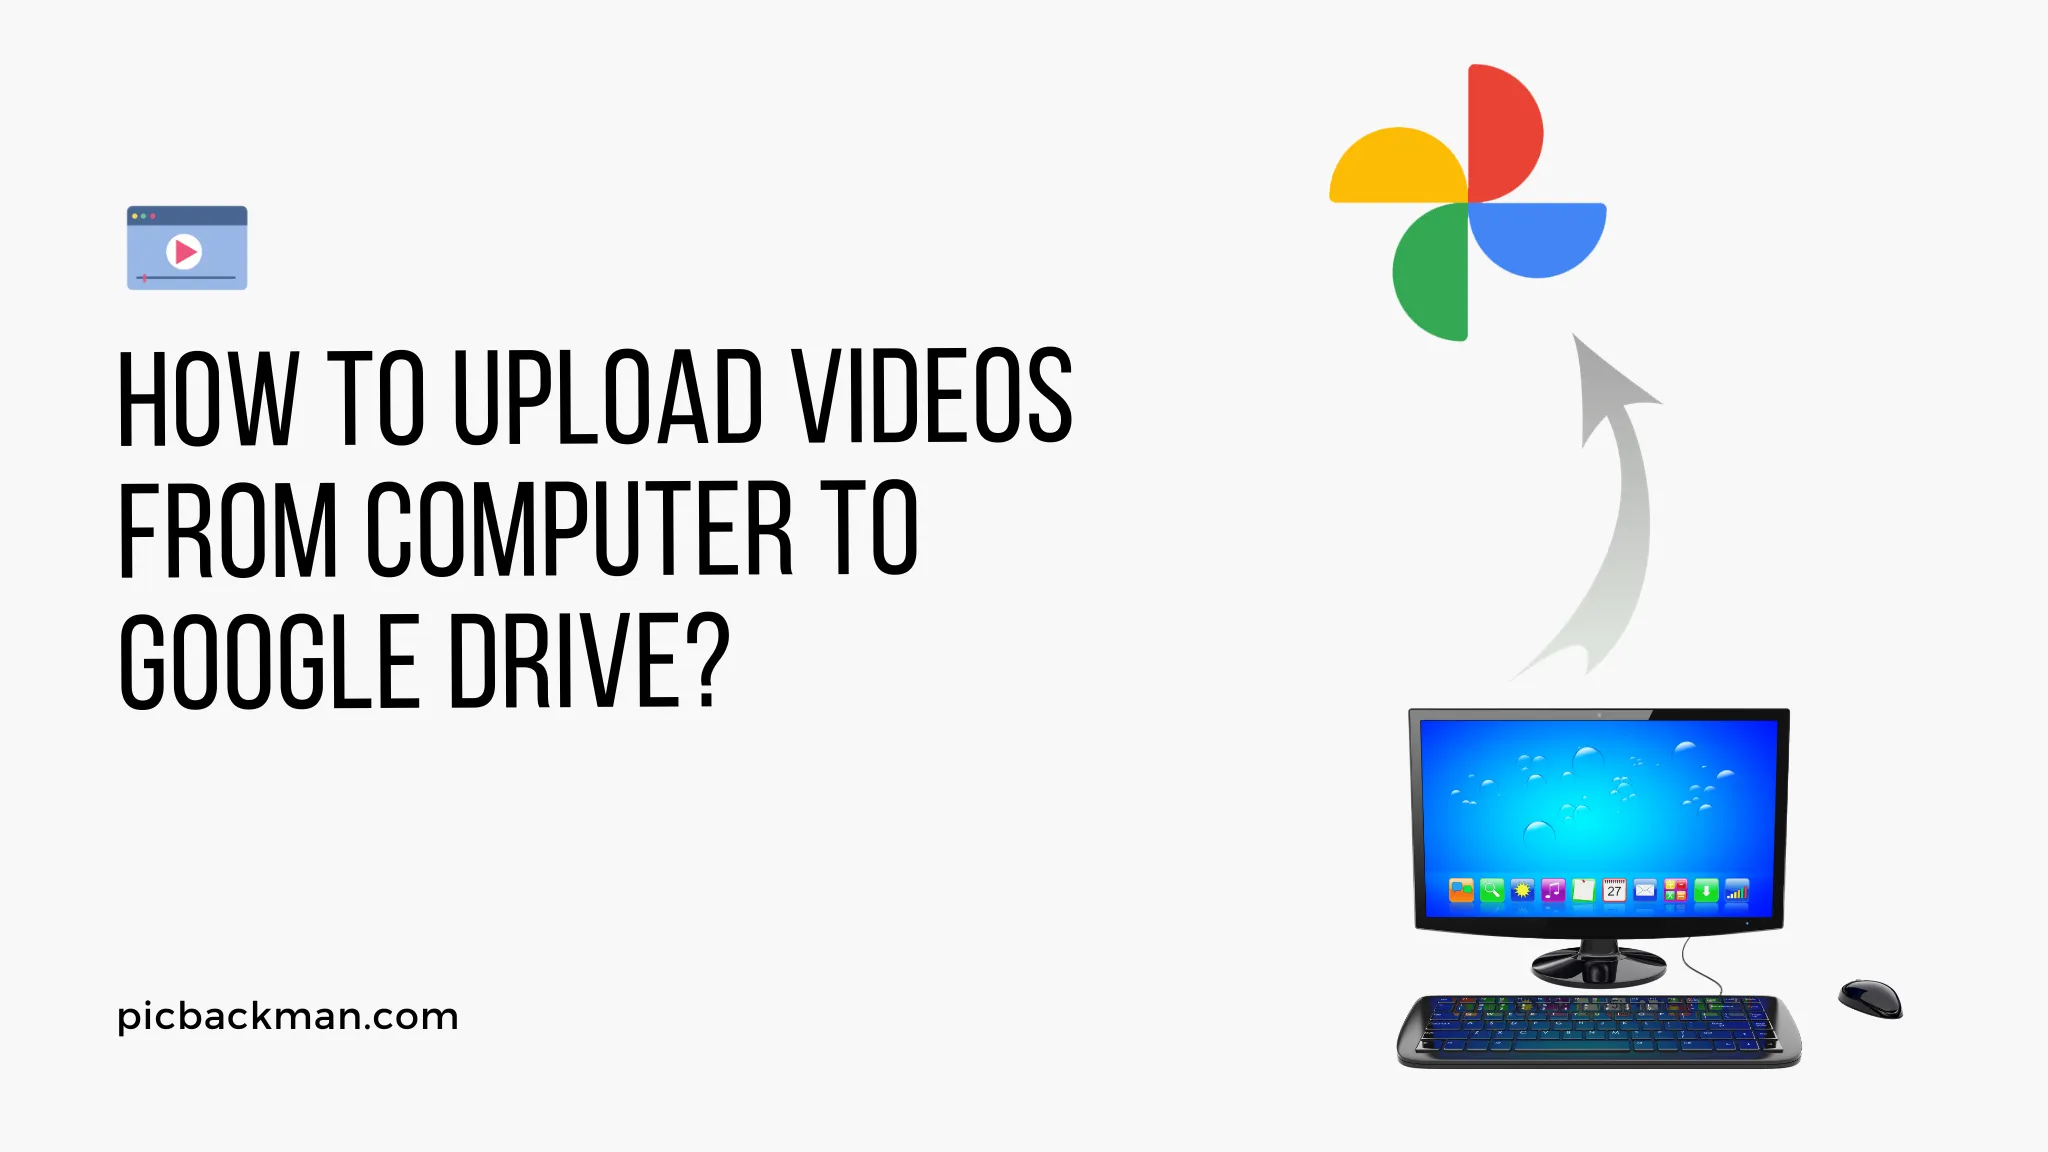 How to upload videos from computer to Google Drive?